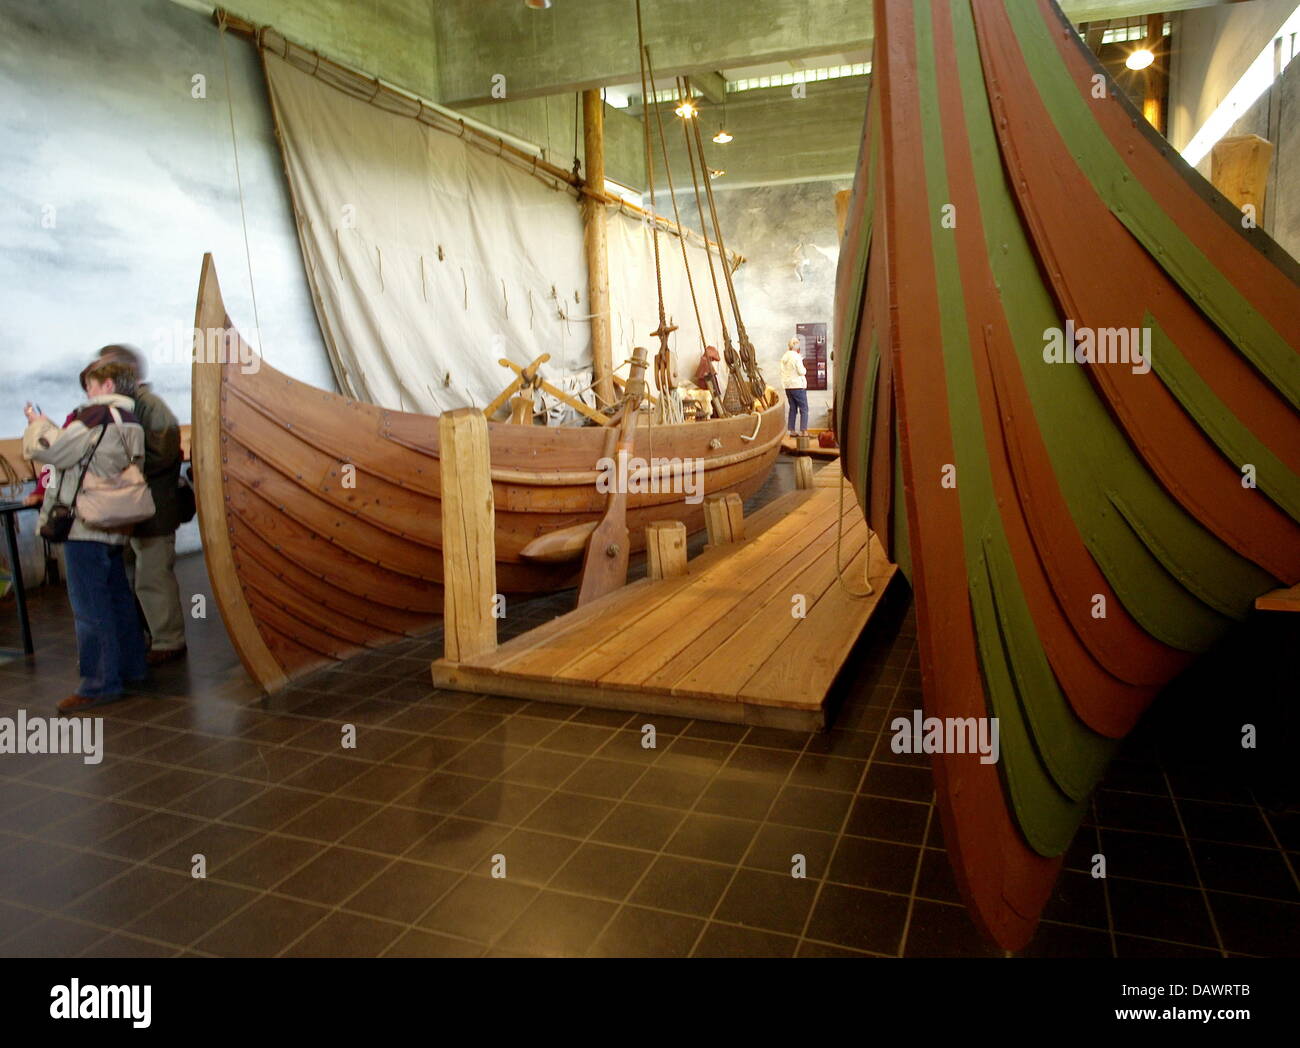 Reconstructed Viking ships of the 11th century, discoverd in the Roskilde fjord in 1962, are presented in the ship hall of the museum for Viking ships in Roskilde, Denmark, 22 May 2007. Shipbuilding and seafaring of the Vikings are presented in the museum that has its own wharf and an archaeological workshop and offers Viking ship boat trips in the summer. Photo: Maurizio Gambarini Stock Photo